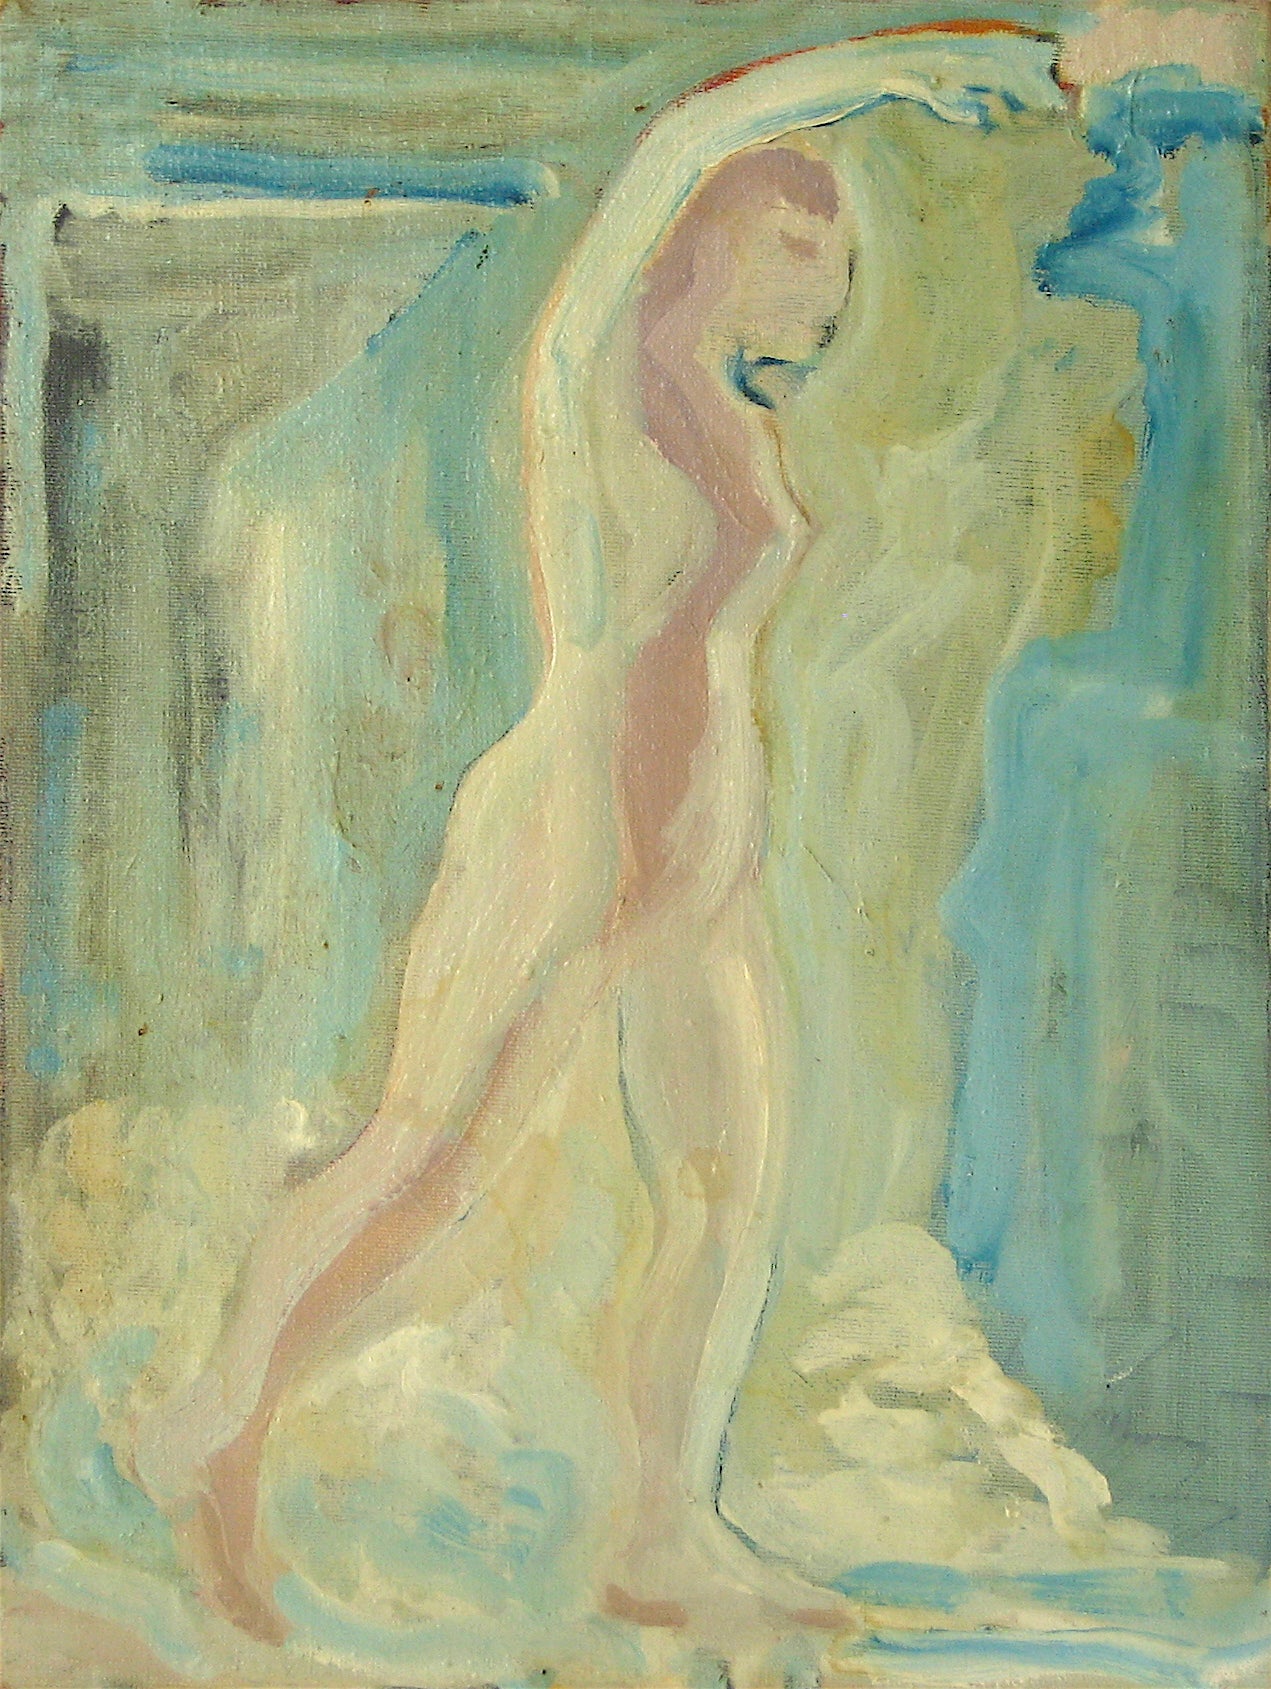 Bay Area Figurative Standiong Form<br>1978 Oil on Canvas<br><br>#12722